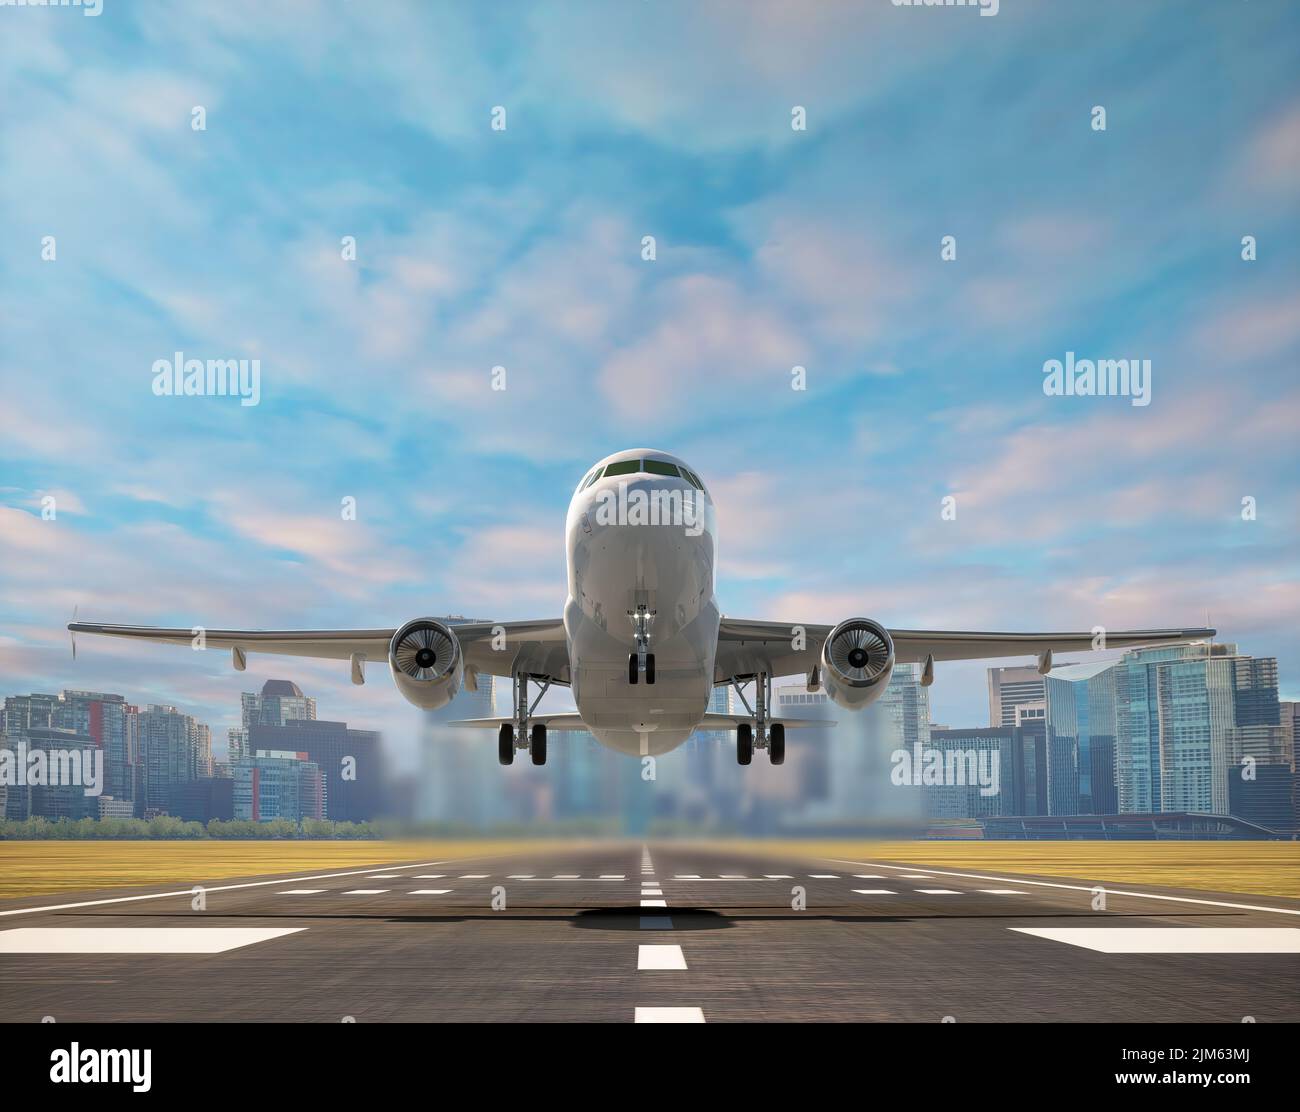 Commercial airplane Take off on airport runway with city in the background and beautiful afternoon skies, 3D illustration. Stock Photo